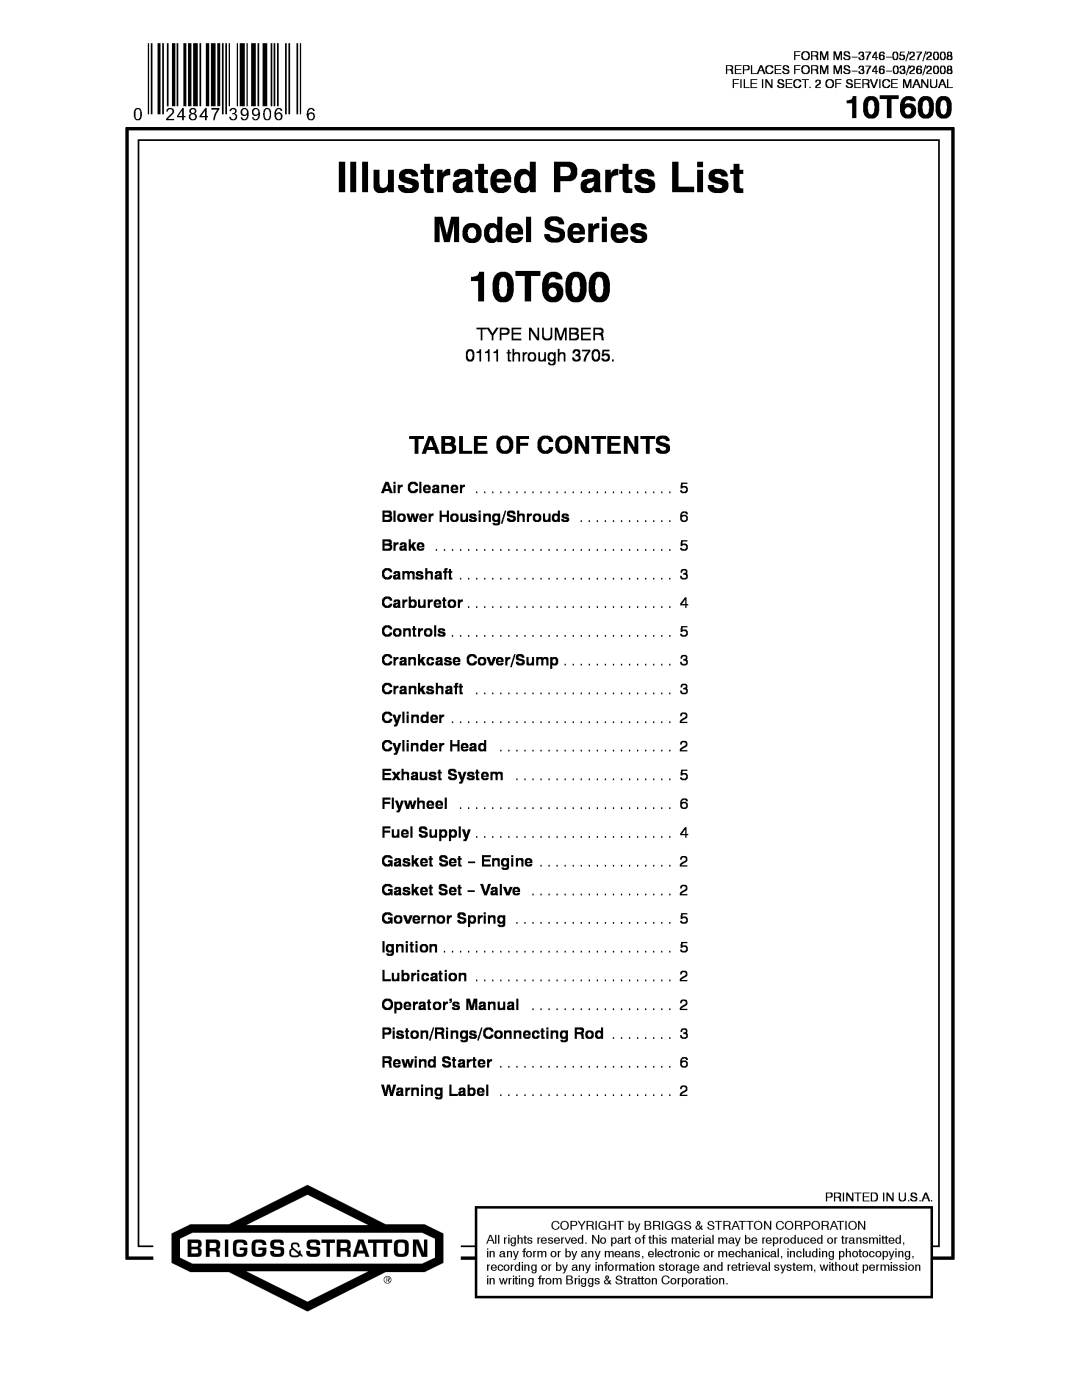 Briggs & Stratton 10T600 service manual Illustrated Parts List, Model Series, Table Of Contents, TYPE NUMBER 0111 through 